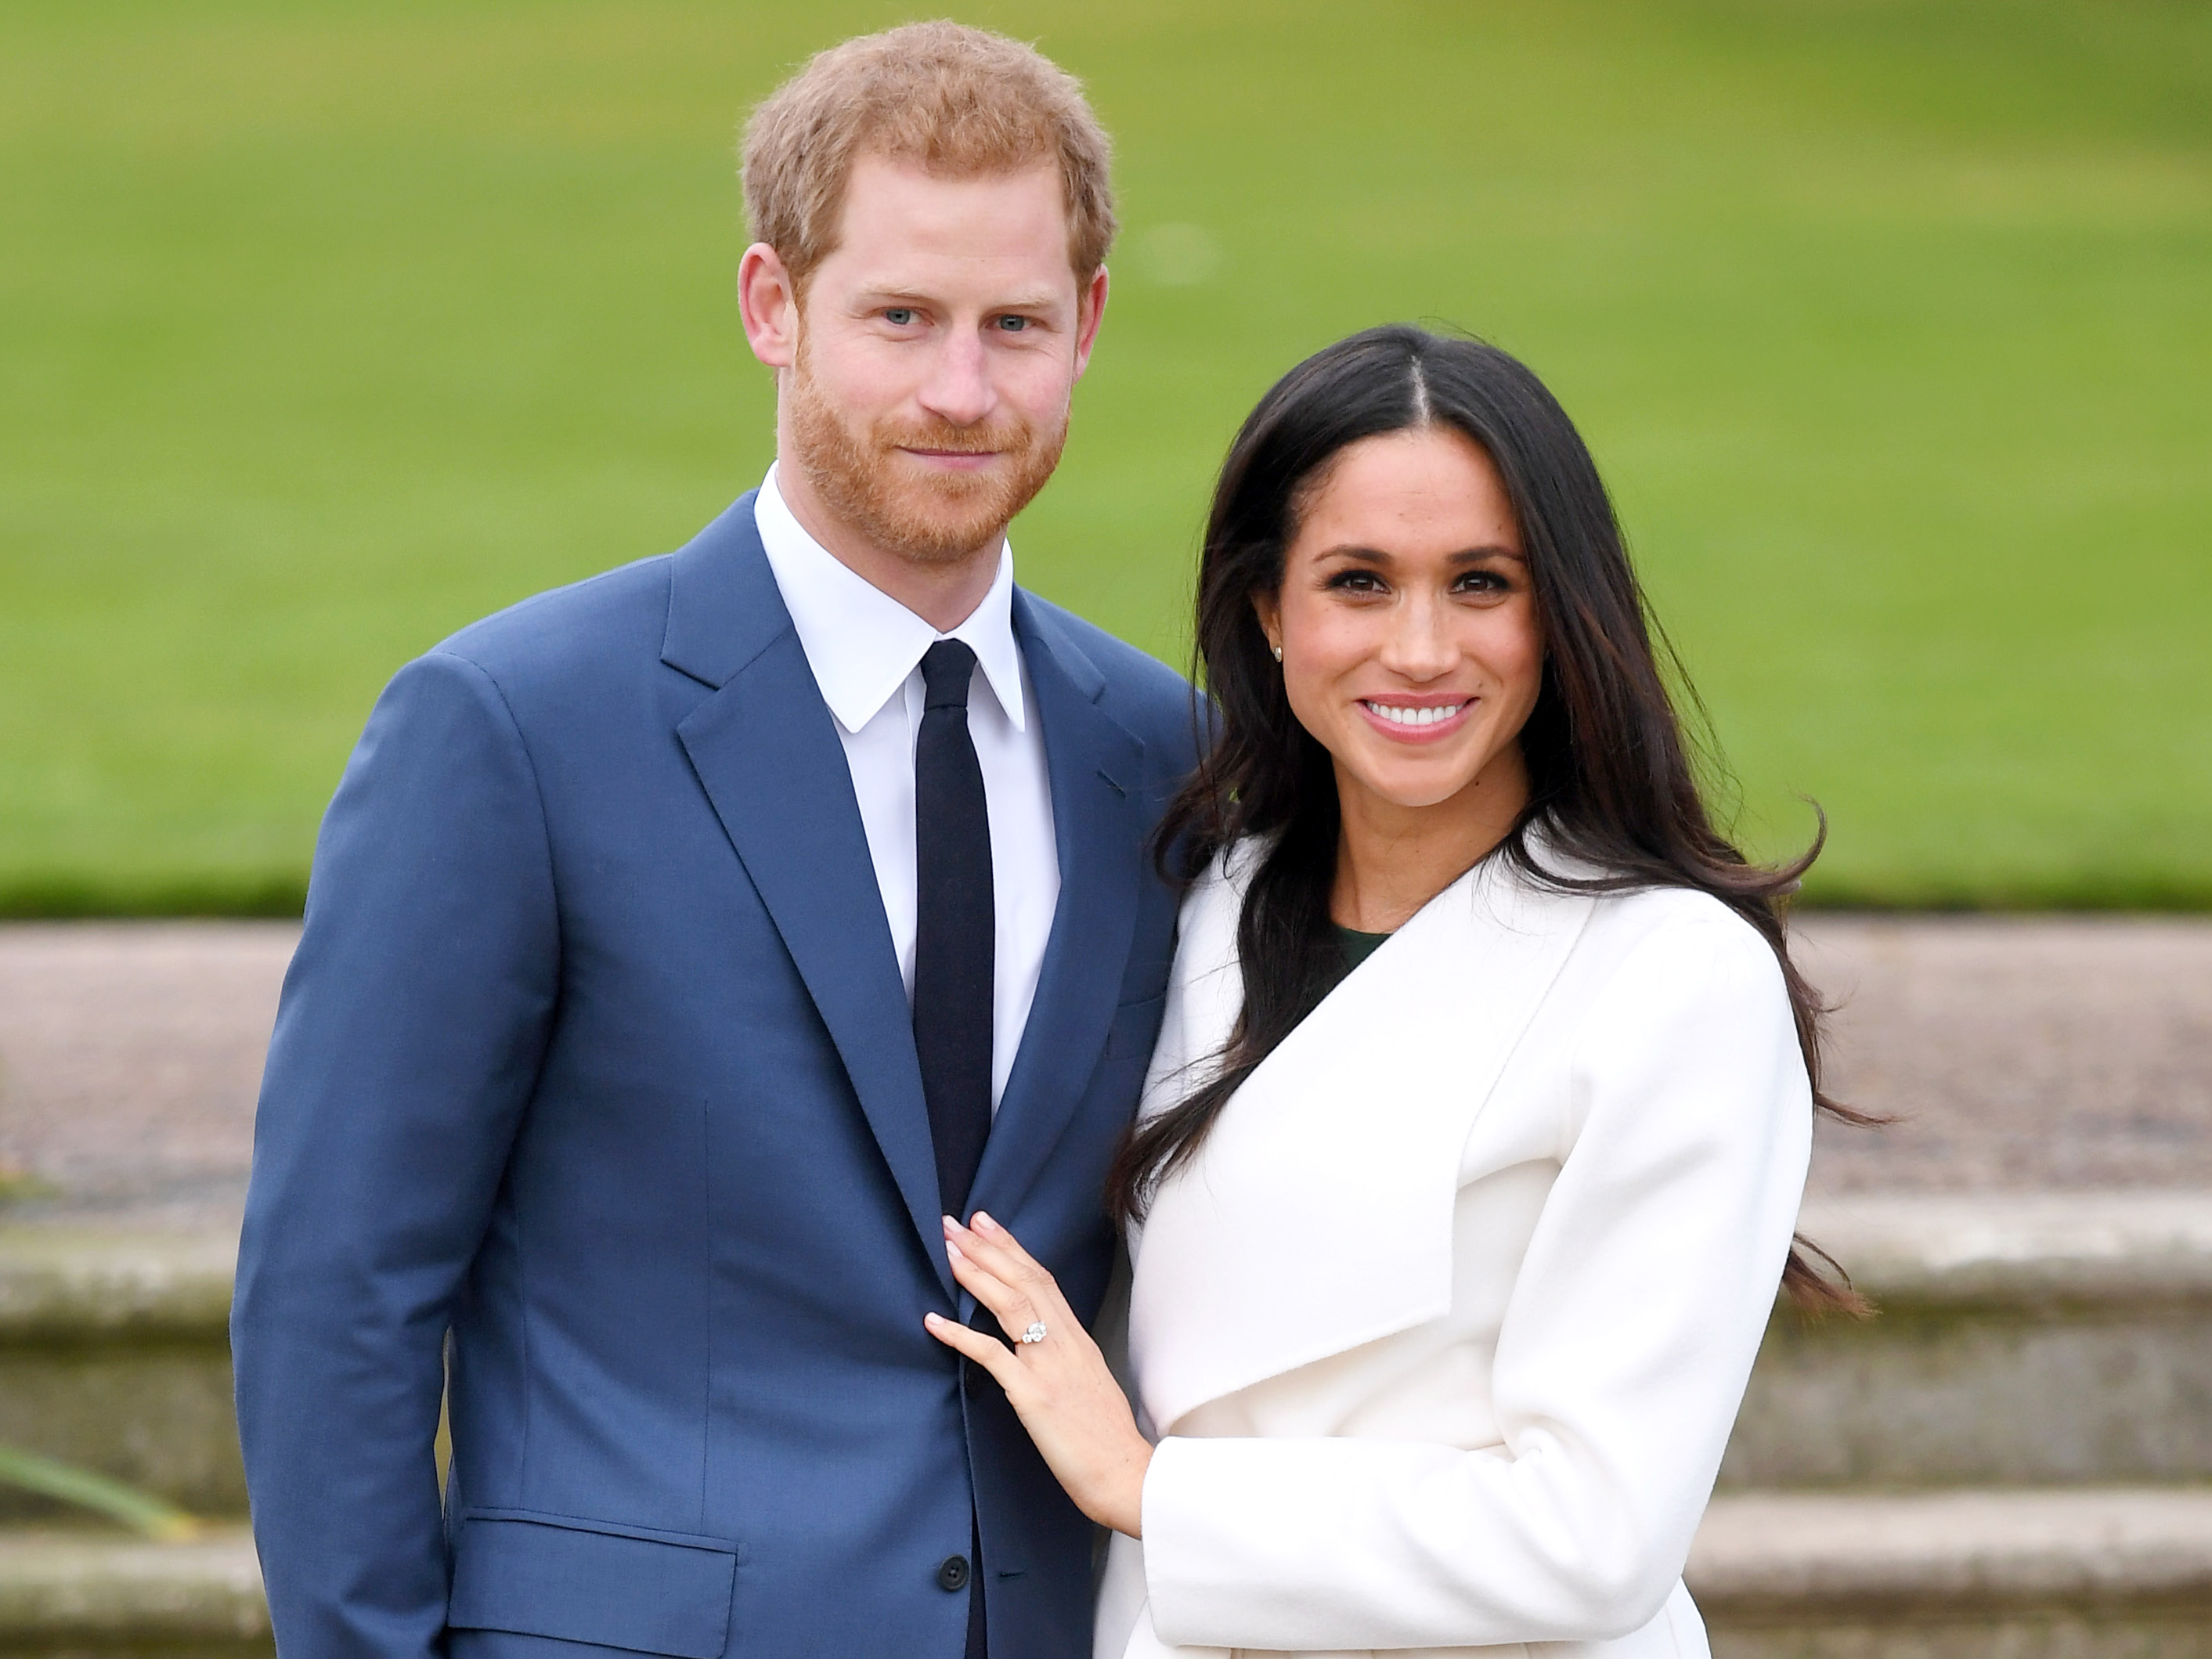 LONDON, ENGLAND - NOVEMBER 27: (EMBARGOED FOR PUBLICATION IN UK NEWSPAPERS UNTIL 24 HOURS AFTER CREATE DATE AND TIME) Prince Harry and Meghan Markle attend an official photocall to announce the engagement of Prince Harry and actress Meghan Markle at The Sunken Gardens at Kensington Palace on November 27, 2017 in London, England. Prince Harry and Meghan Markle have been a couple officially since November 2016 and are due to marry in Spring 2018. (Photo by Karwai Tang/WireImage)